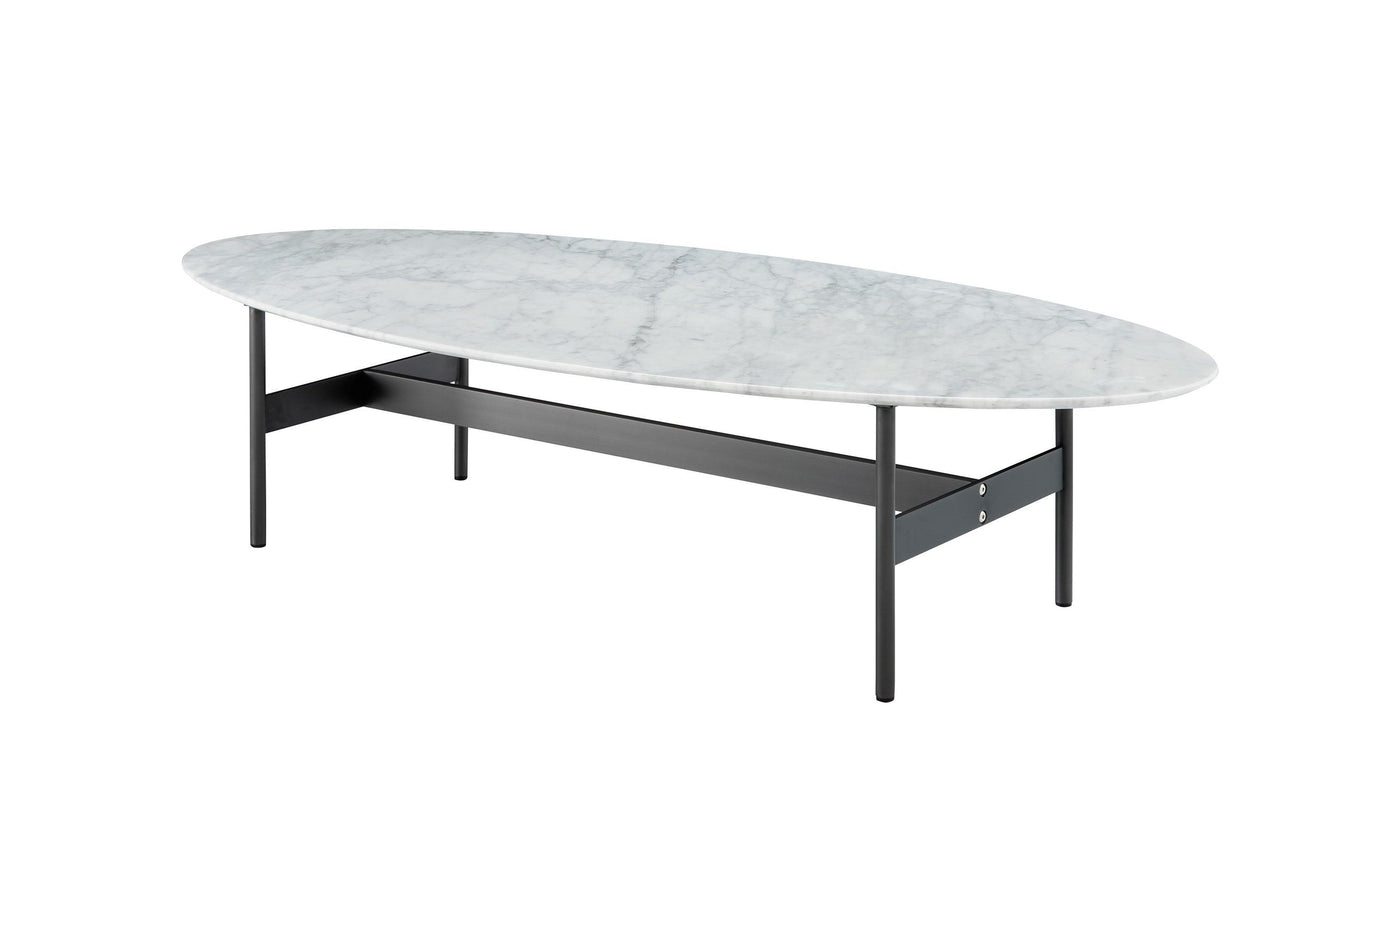 Kenny oval marble coffee table Hoya Casa Hoyacasa.ca couch sofa bed 4 seater sectional table kitchen table love seat sofa bed matress Toronto Canada manufactures home decoration frames indoor Ottoman sale